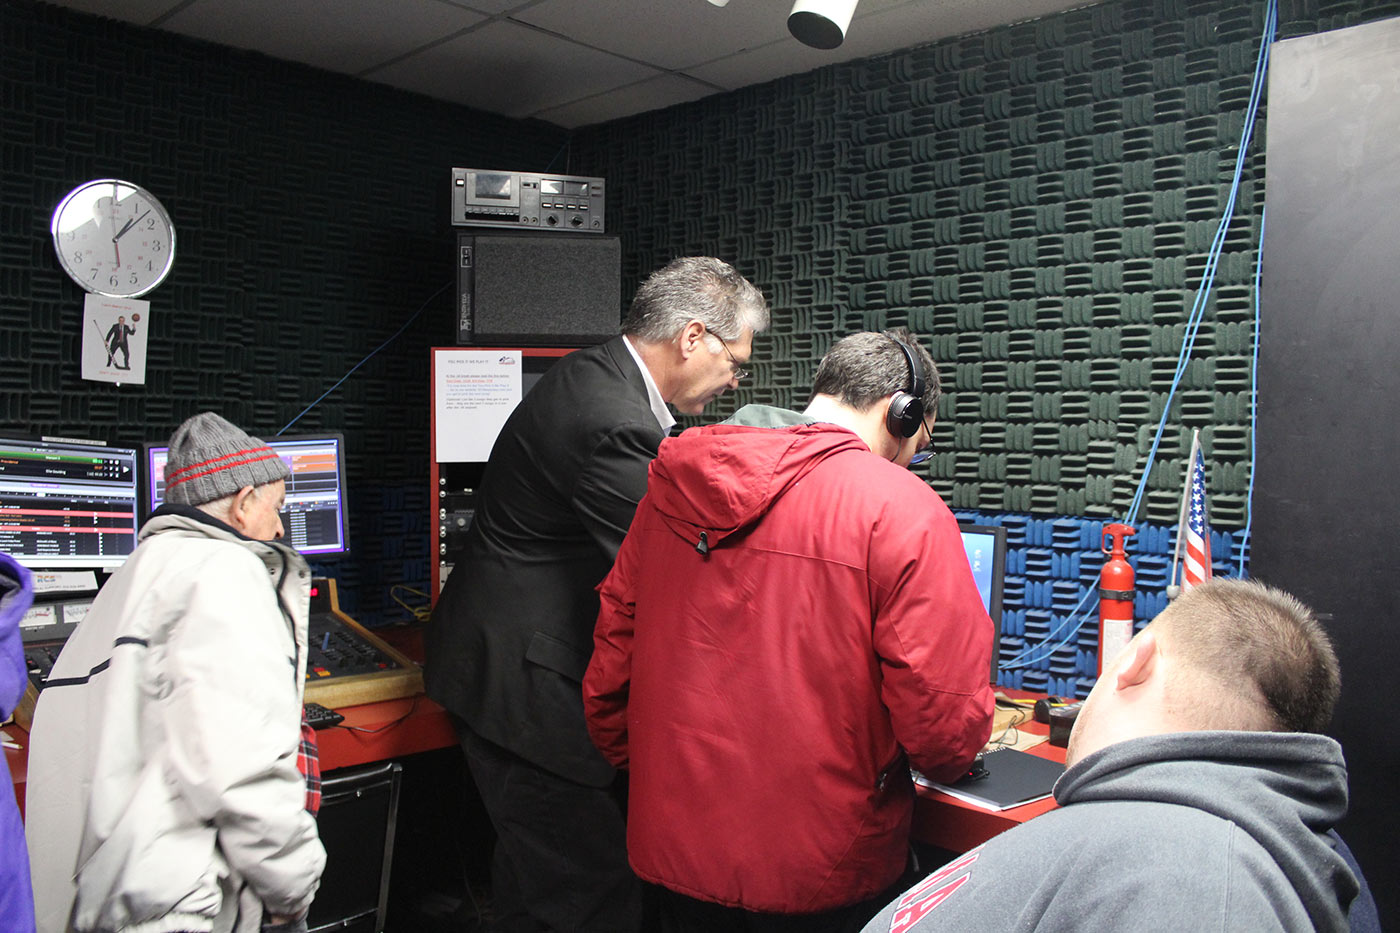 Group gathered around computer in radio booth